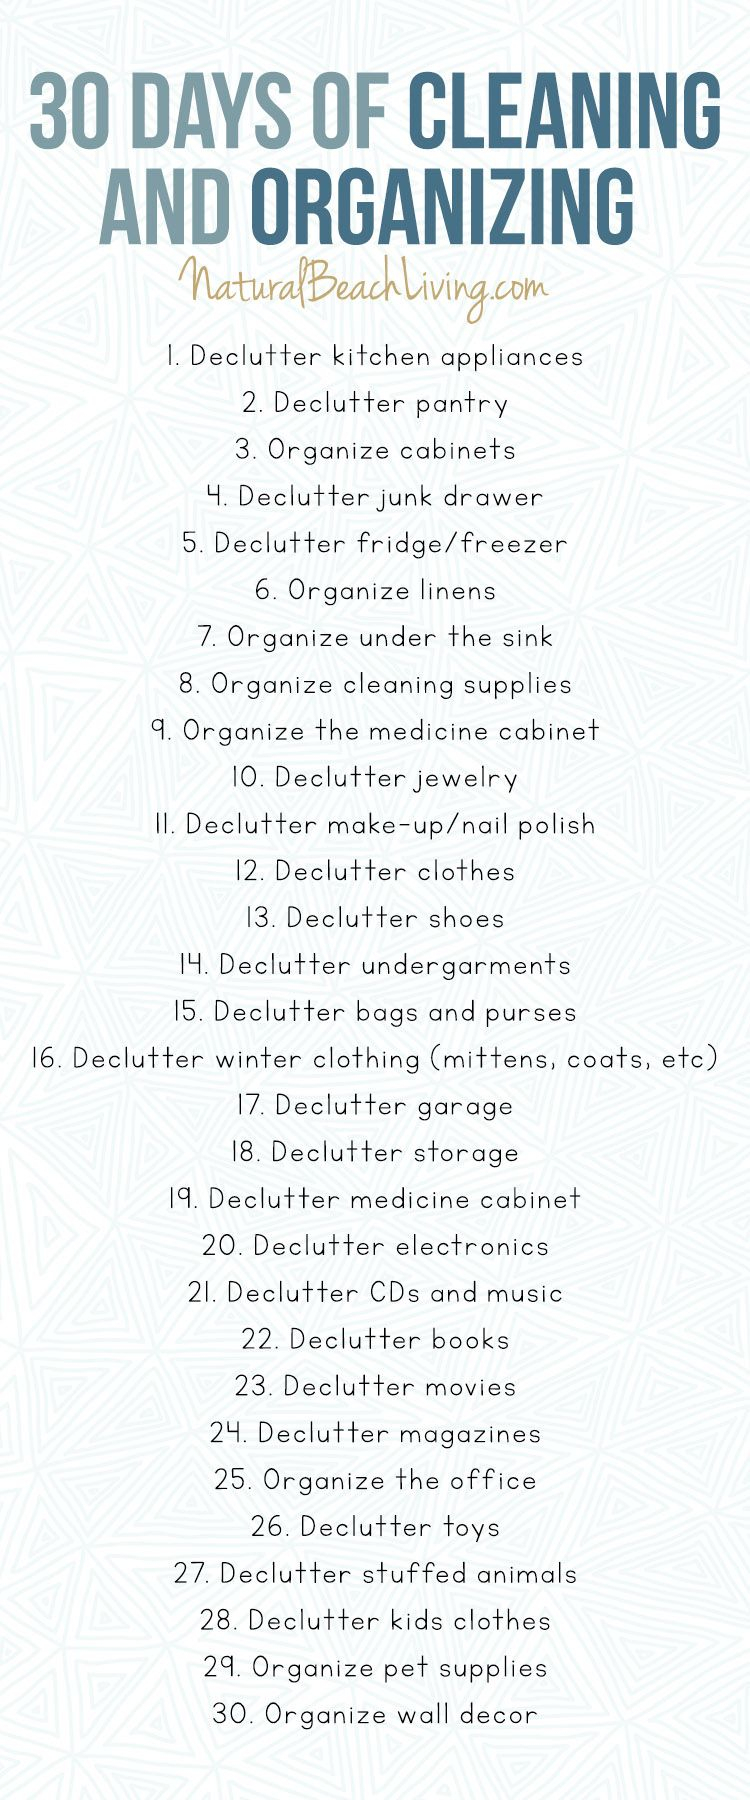 30 Days Of Cleaning And Organizing Challenge  Printable pertaining to 30 Day Declutter Challenge Calendar